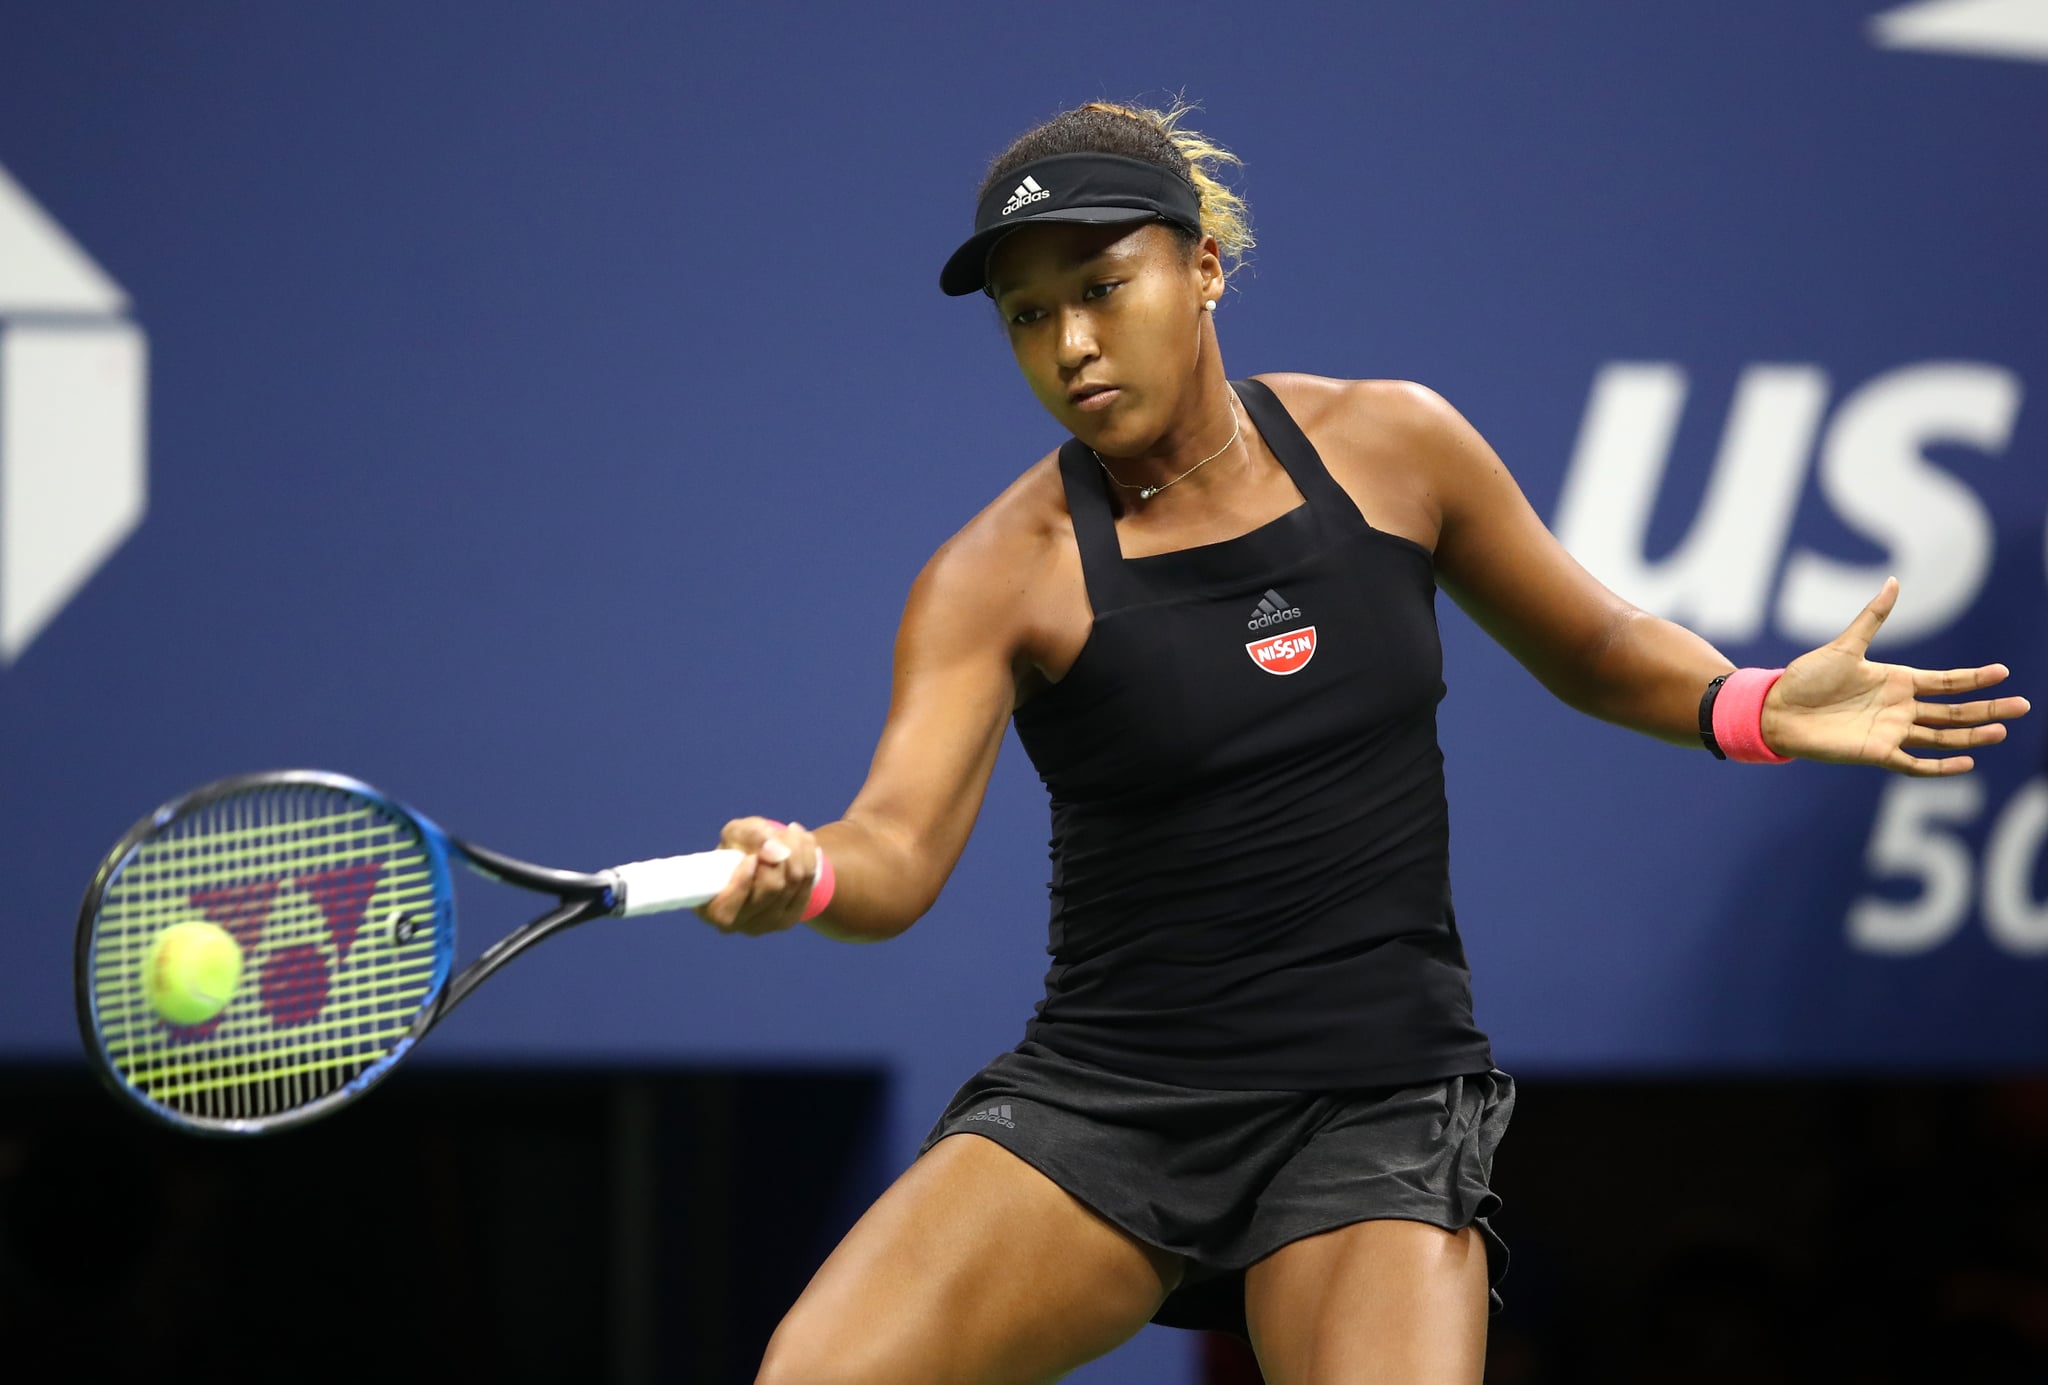 NEW YORK, NY - SEPTEMBER 08:  Naomi Osaka of Japan returns the ball during her Women's Singles finals match against Serena Williams of the United States on Day Thirteen of the 2018 US Open at the USTA Billie Jean King National Tennis Center on September 8, 2018 in the Flushing neighborhood of the Queens borough of New York City.  (Photo by Julian Finney/Getty Images)